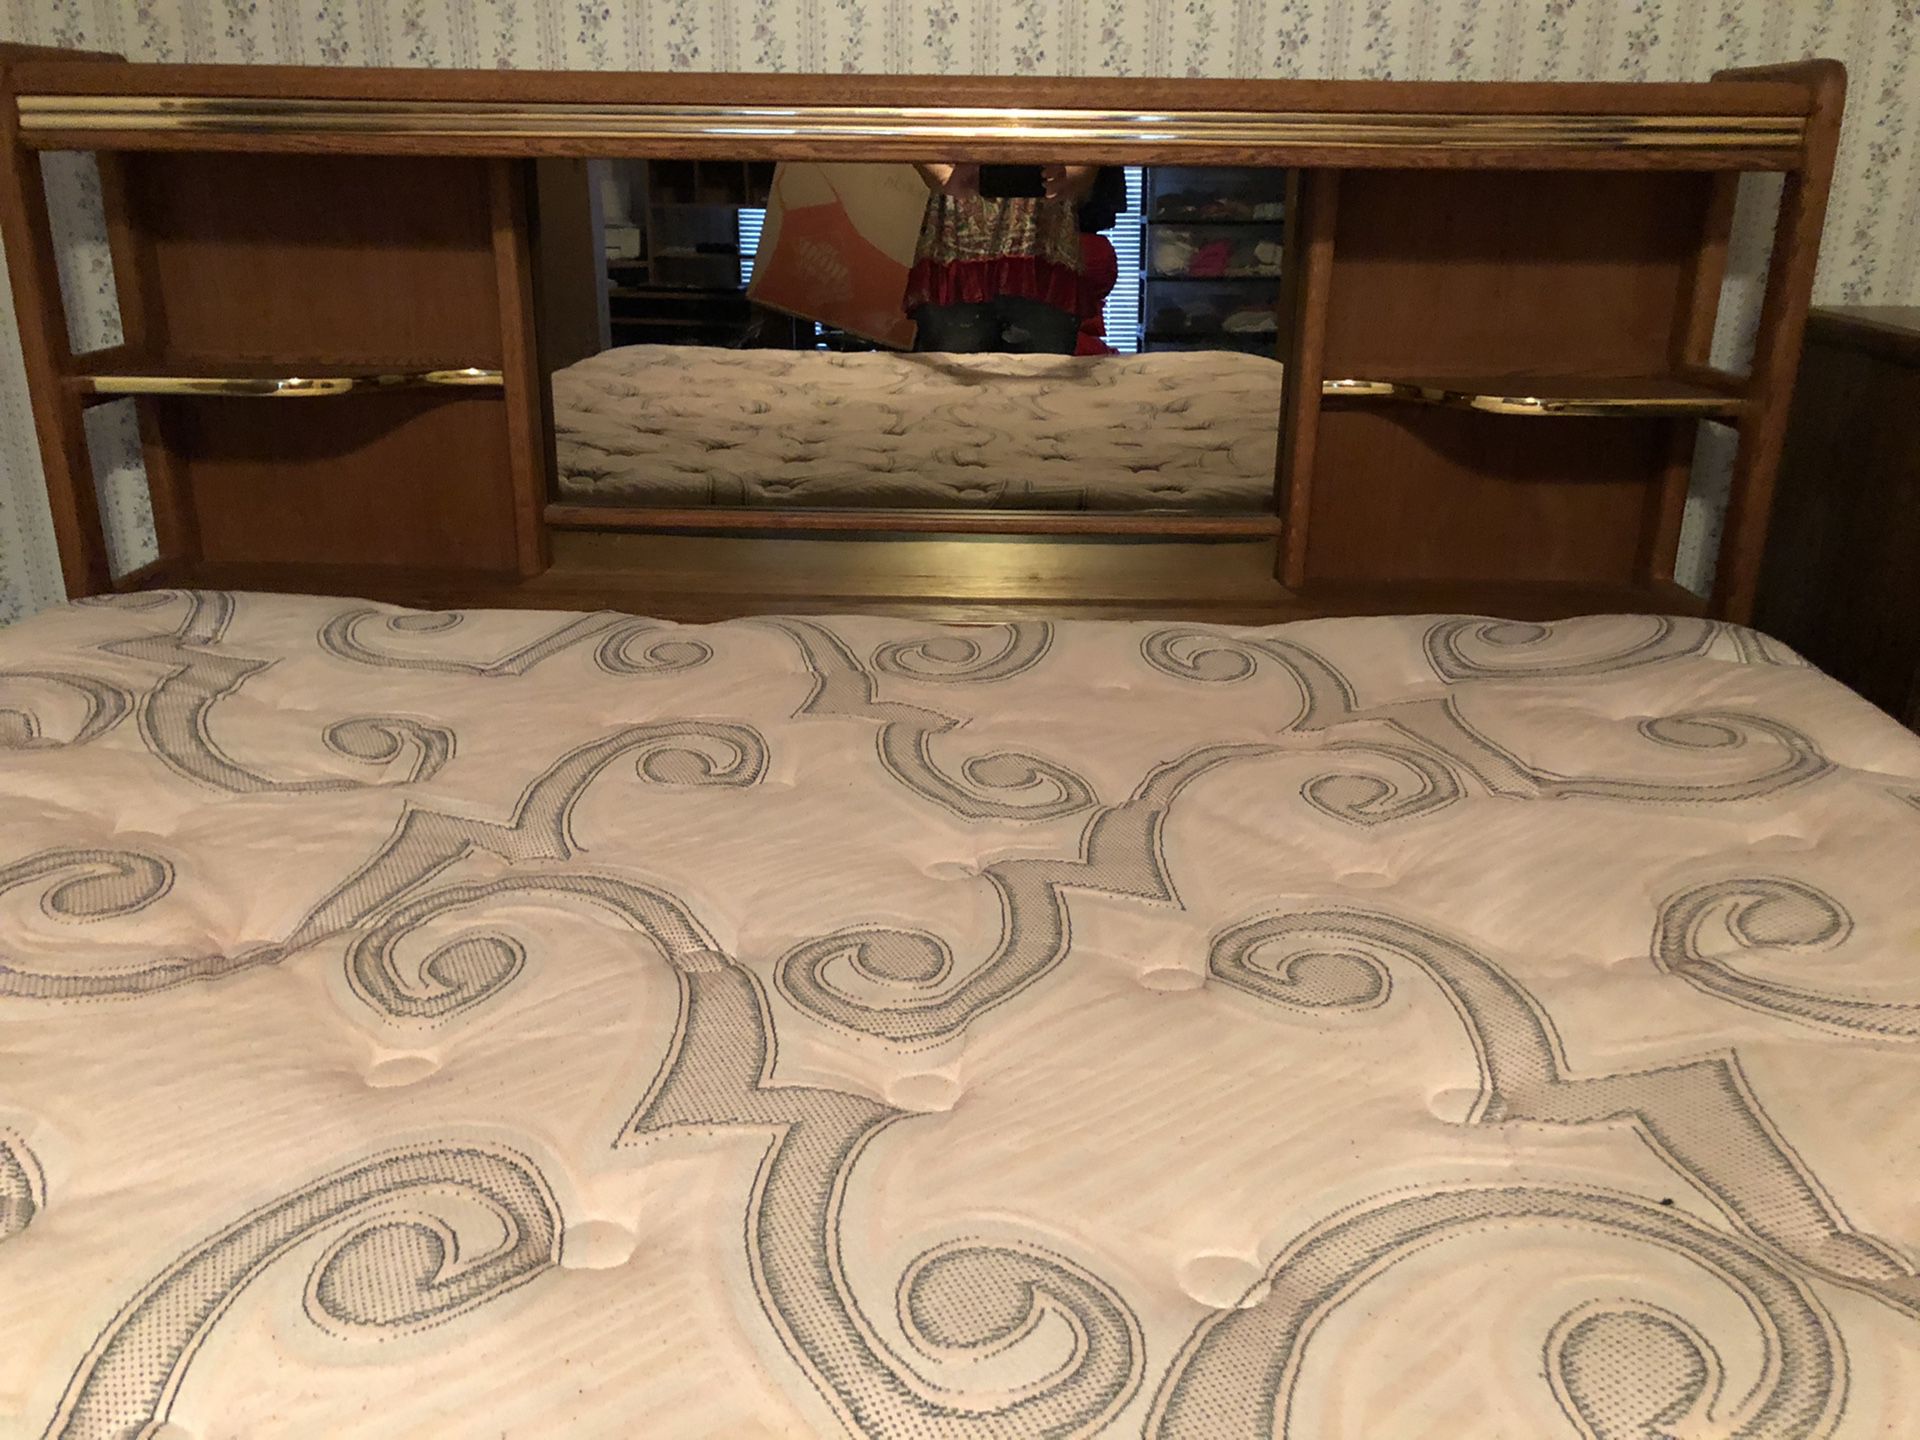 King size, solid oak, lighted waterbed frame. (No mattress) $300.00